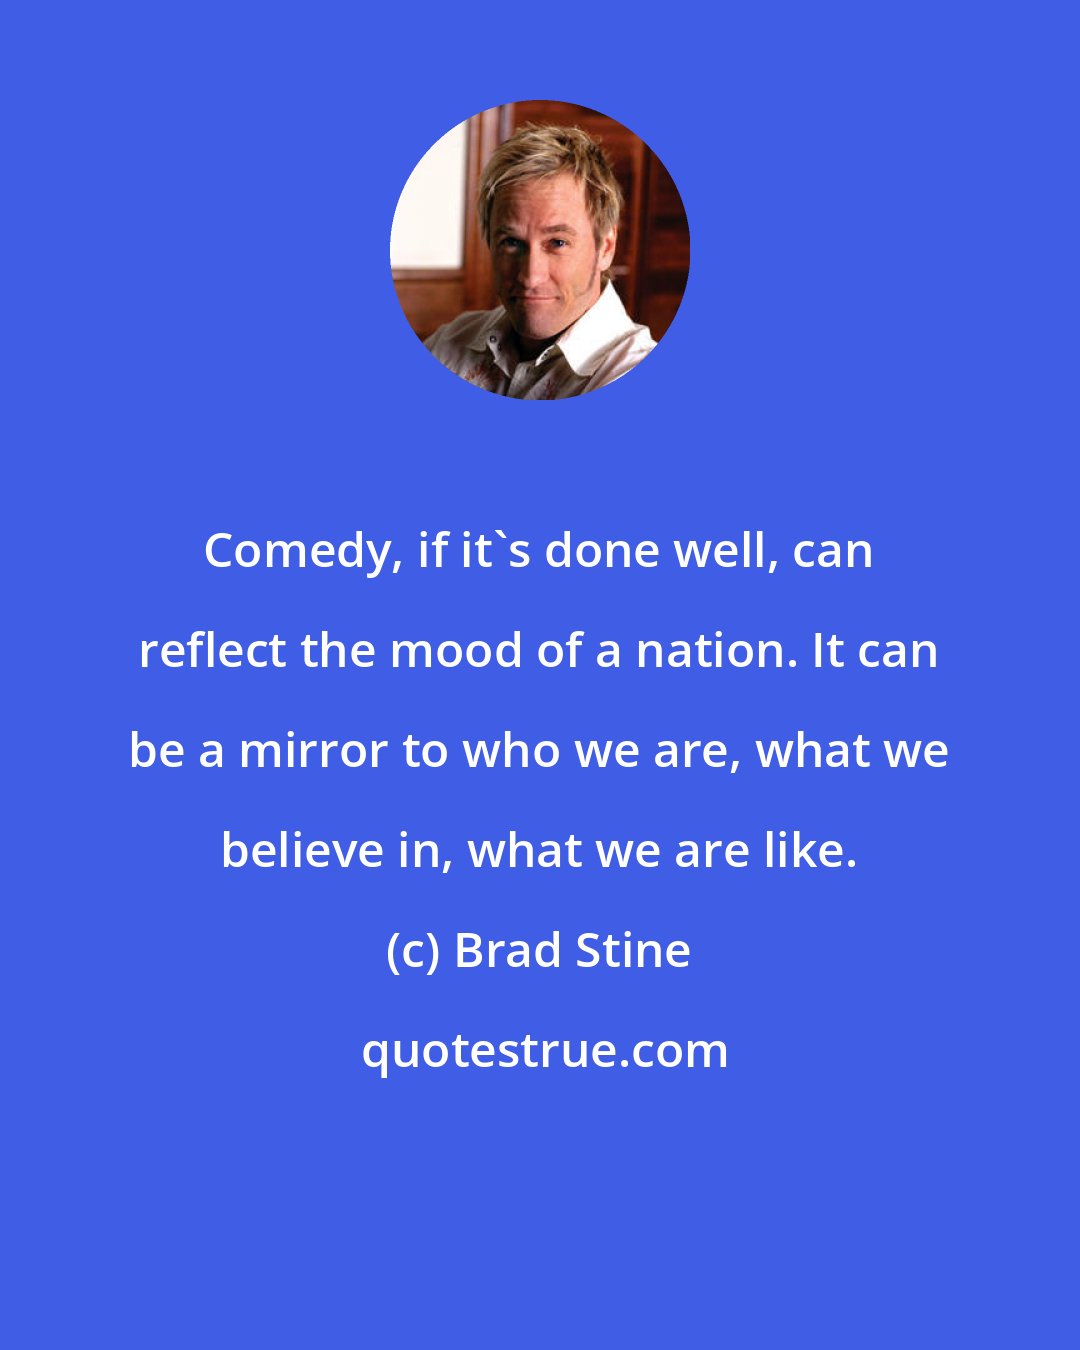 Brad Stine: Comedy, if it's done well, can reflect the mood of a nation. It can be a mirror to who we are, what we believe in, what we are like.